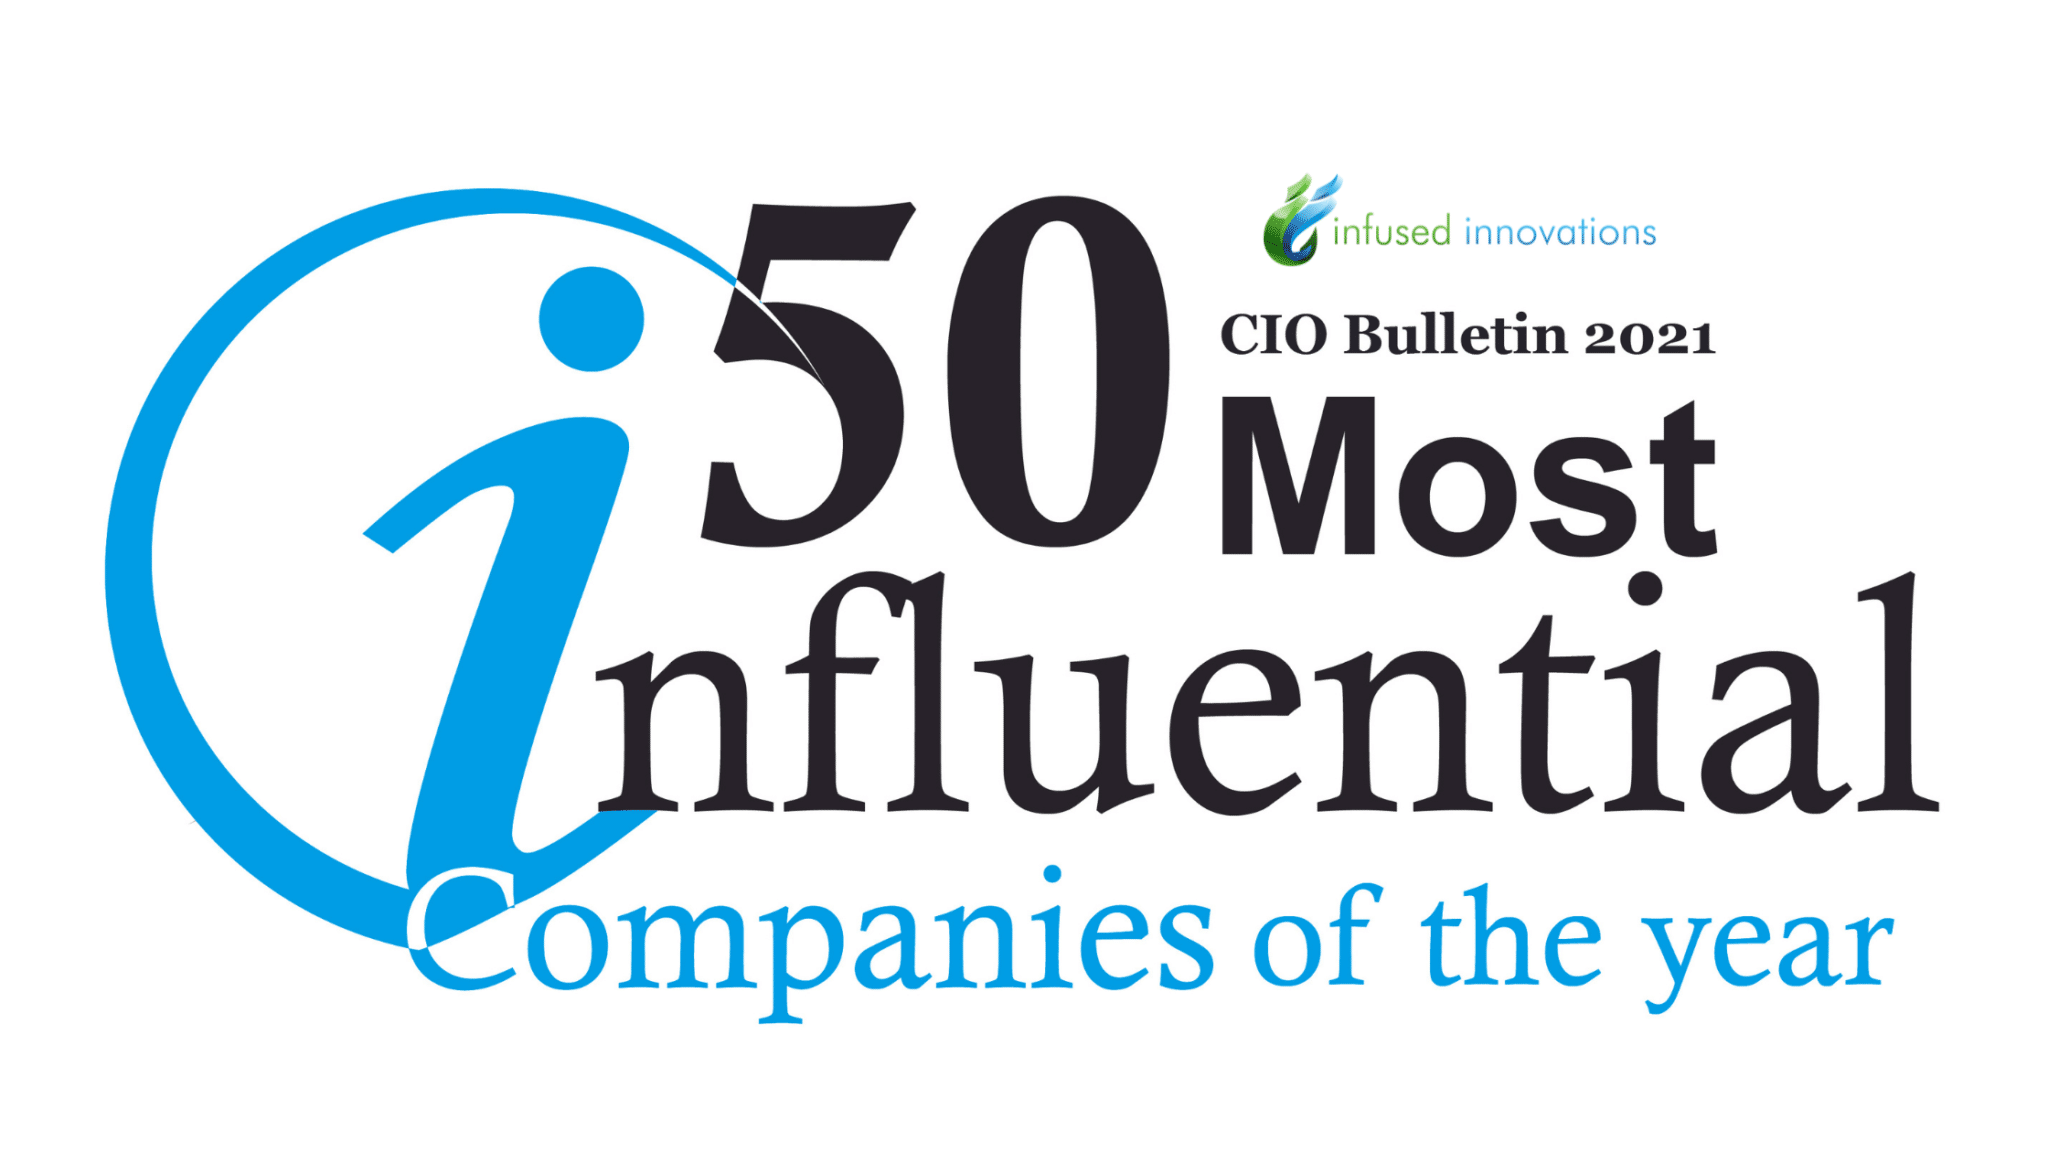 CIO Bulletin Recognizes Infused Innovations in Top 50 Most Influential Companies of the Year 2021 10